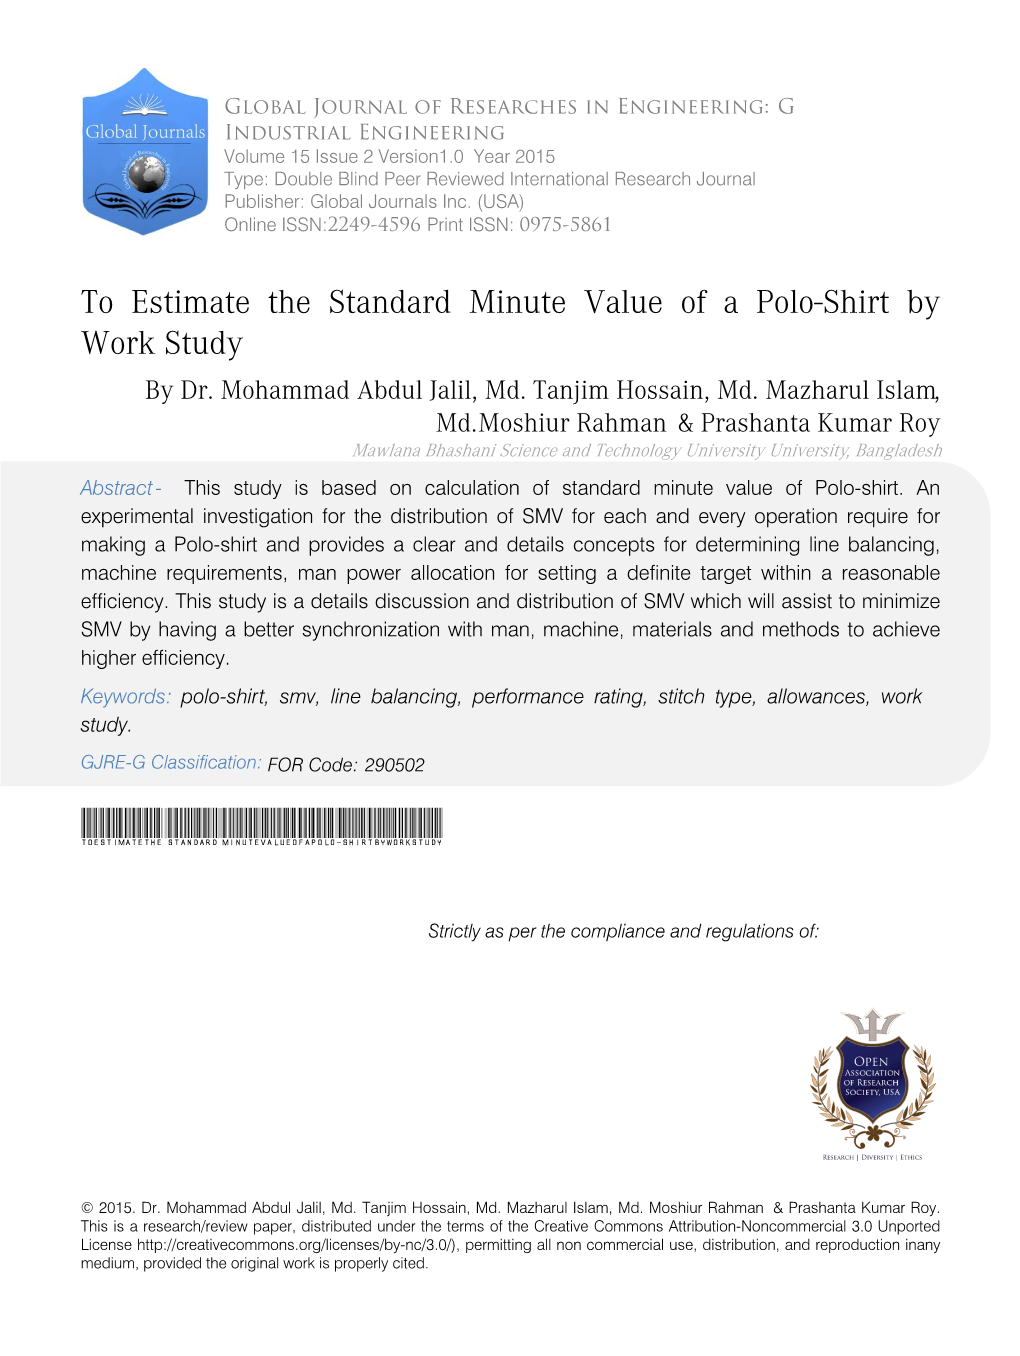 To Estimate the Standard Minute Value of a Polo-Shirt by Work Study by Dr